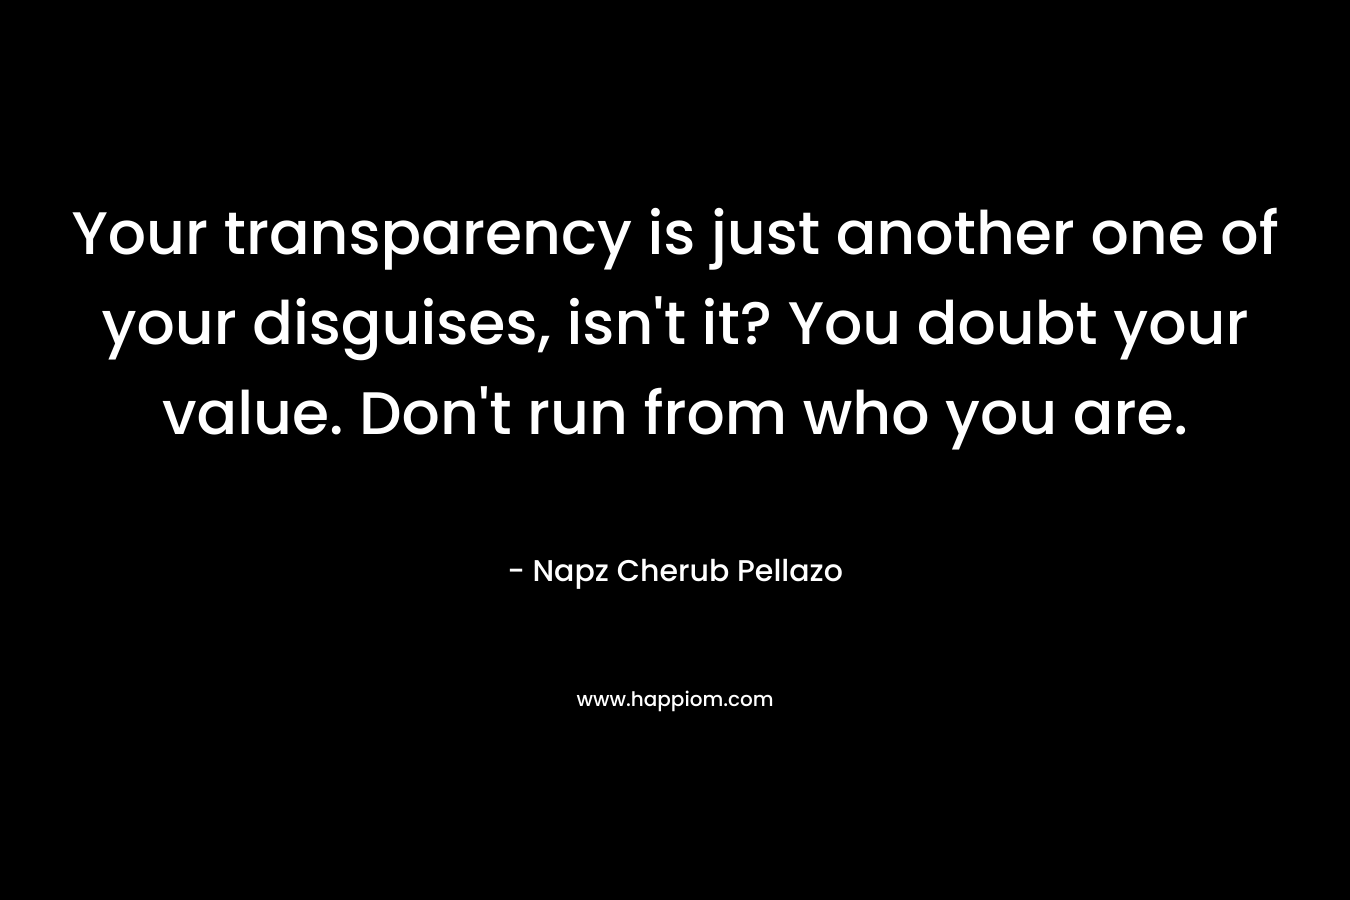 Your transparency is just another one of your disguises, isn’t it? You doubt your value. Don’t run from who you are. – Napz Cherub Pellazo